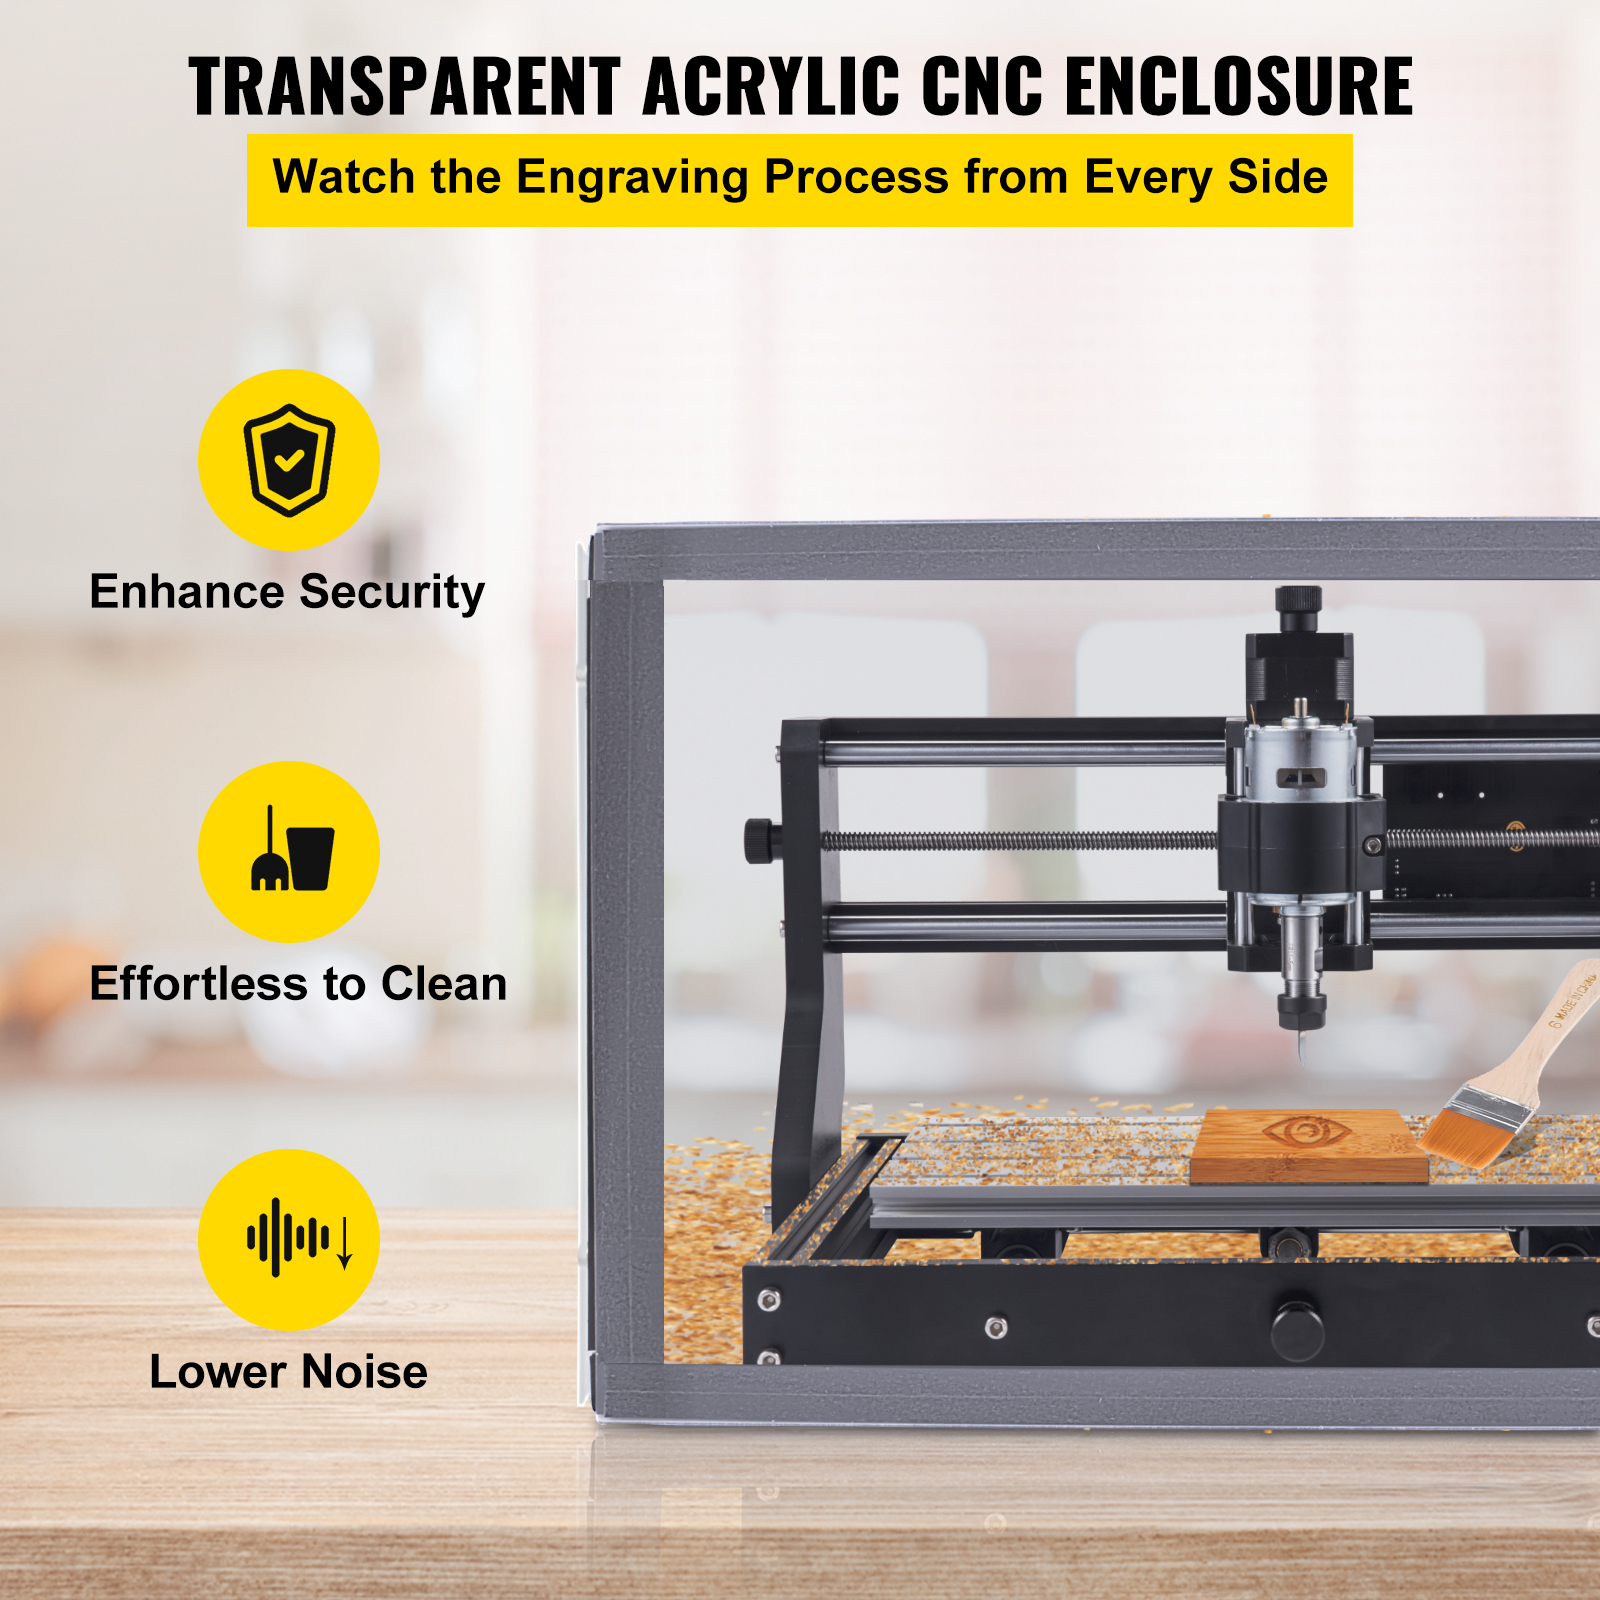 VEVOR CNC 3018 PRO Router Machine with Transparent Enclosure, GRBL Control -Axis Milling Engraver Engraving Machine, DIY CNC Router Kit Offline  Controller, for Wood Acrylic Plastic PCB PVC Carving